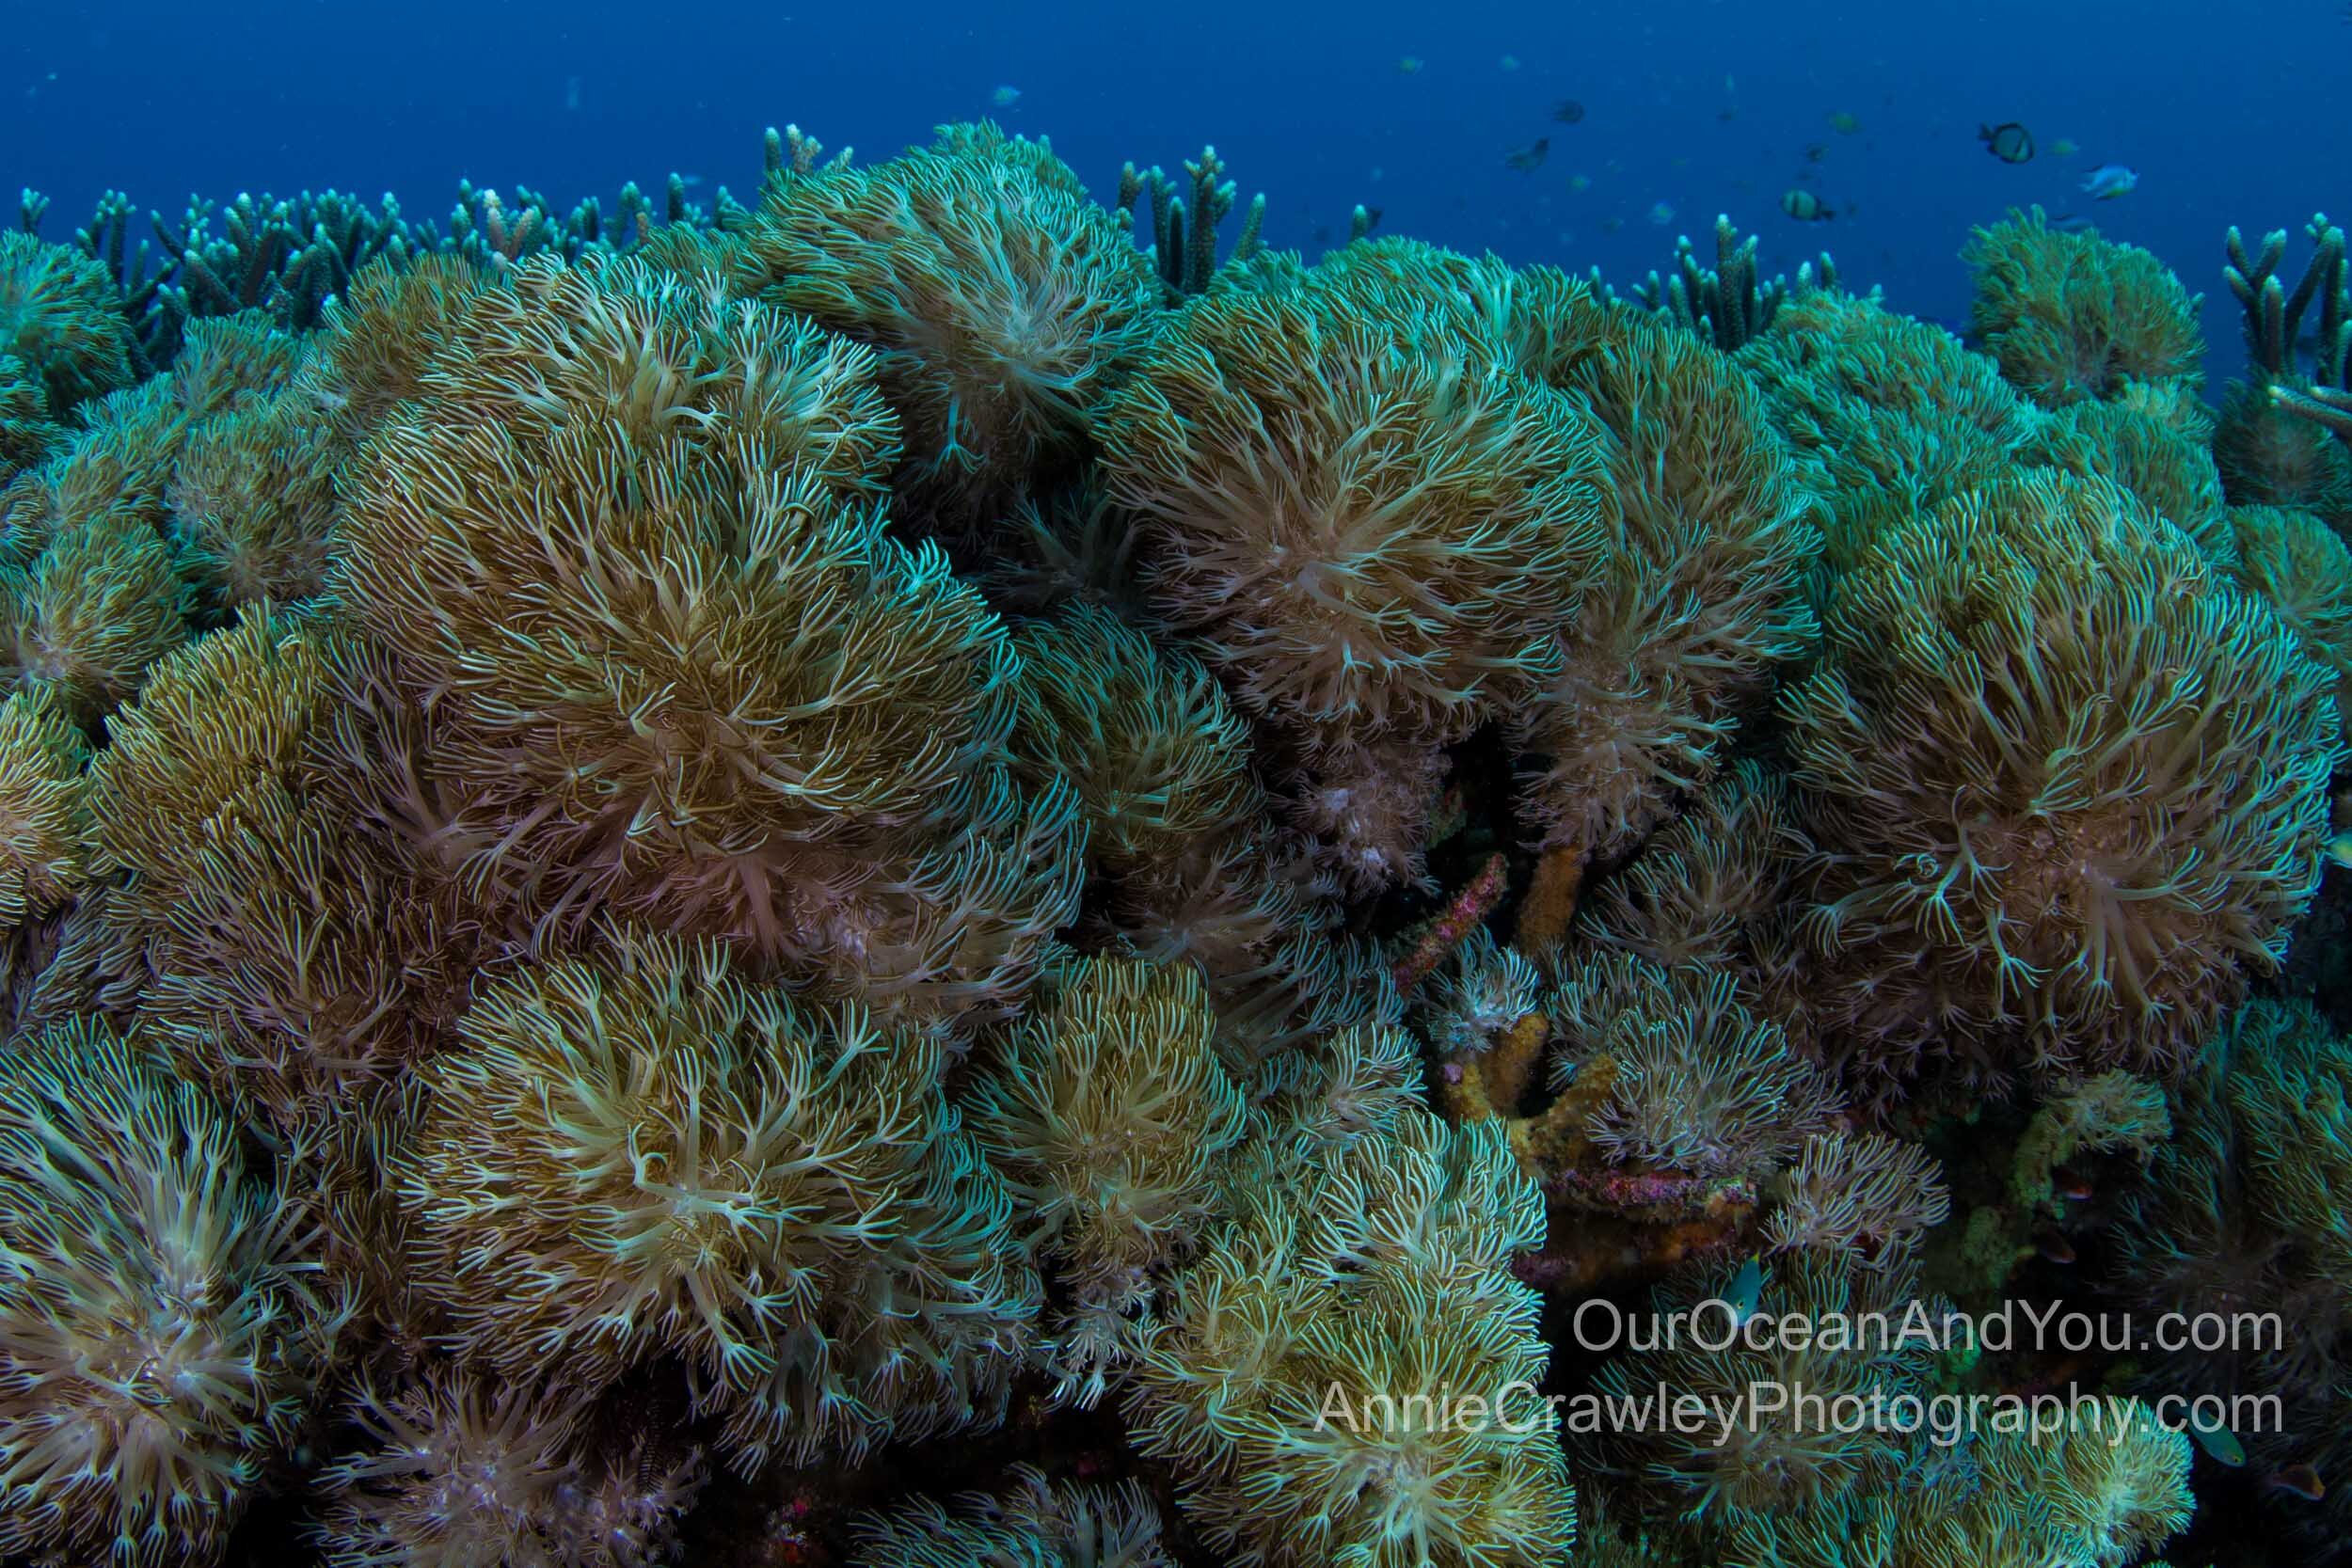 Ocean acidification affects corals' ability to acquire calcium carbonate to build their hard skeletons.